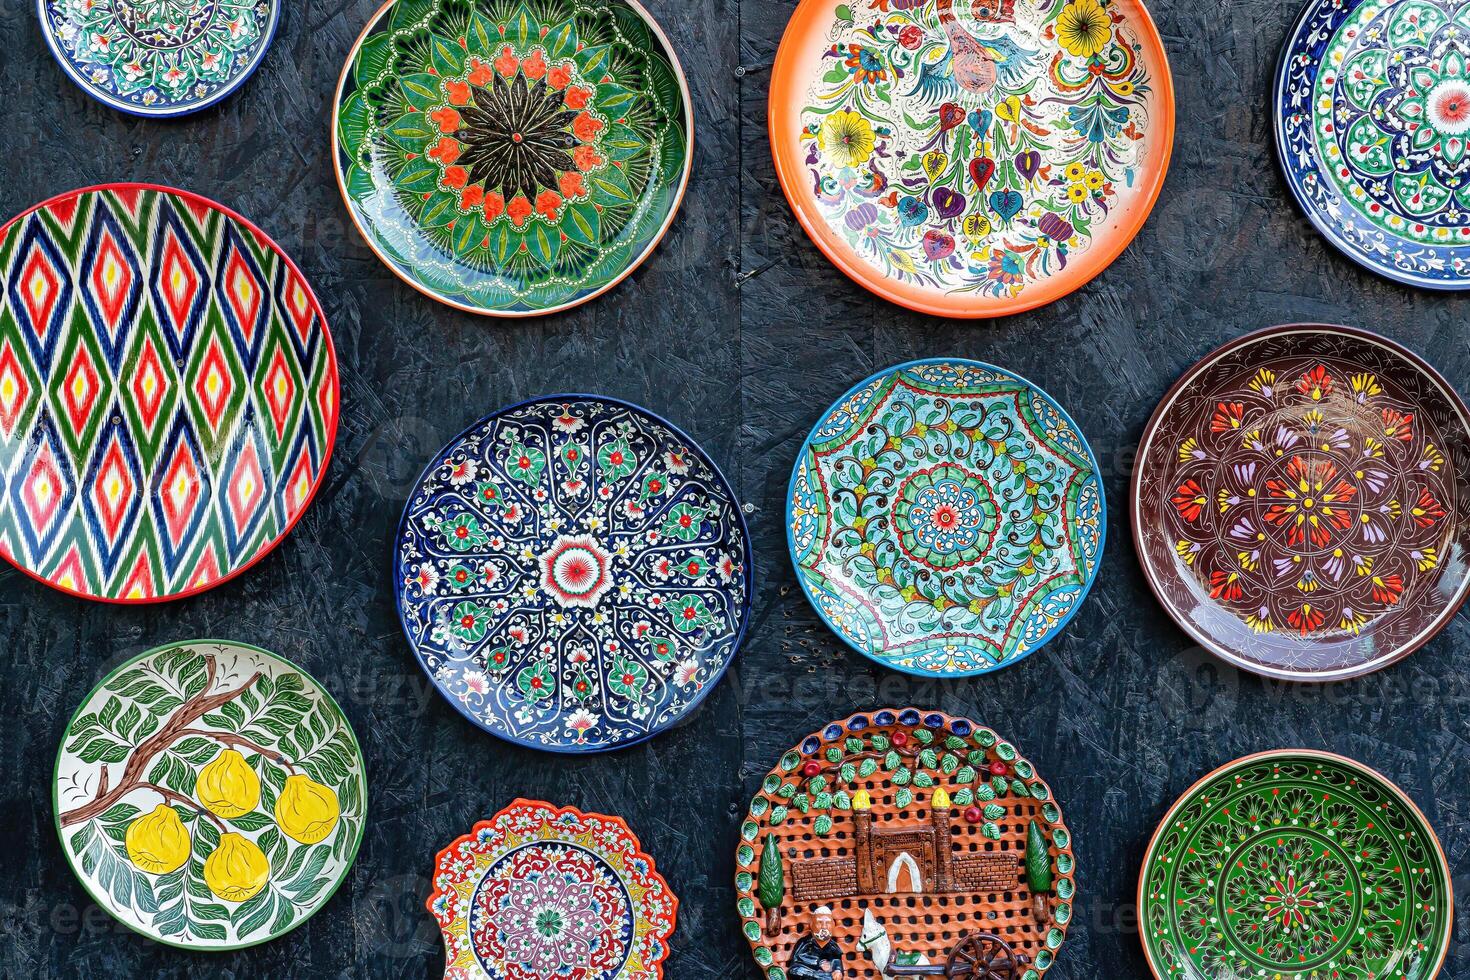 Arabic painted ceramic plates on the wall. photo